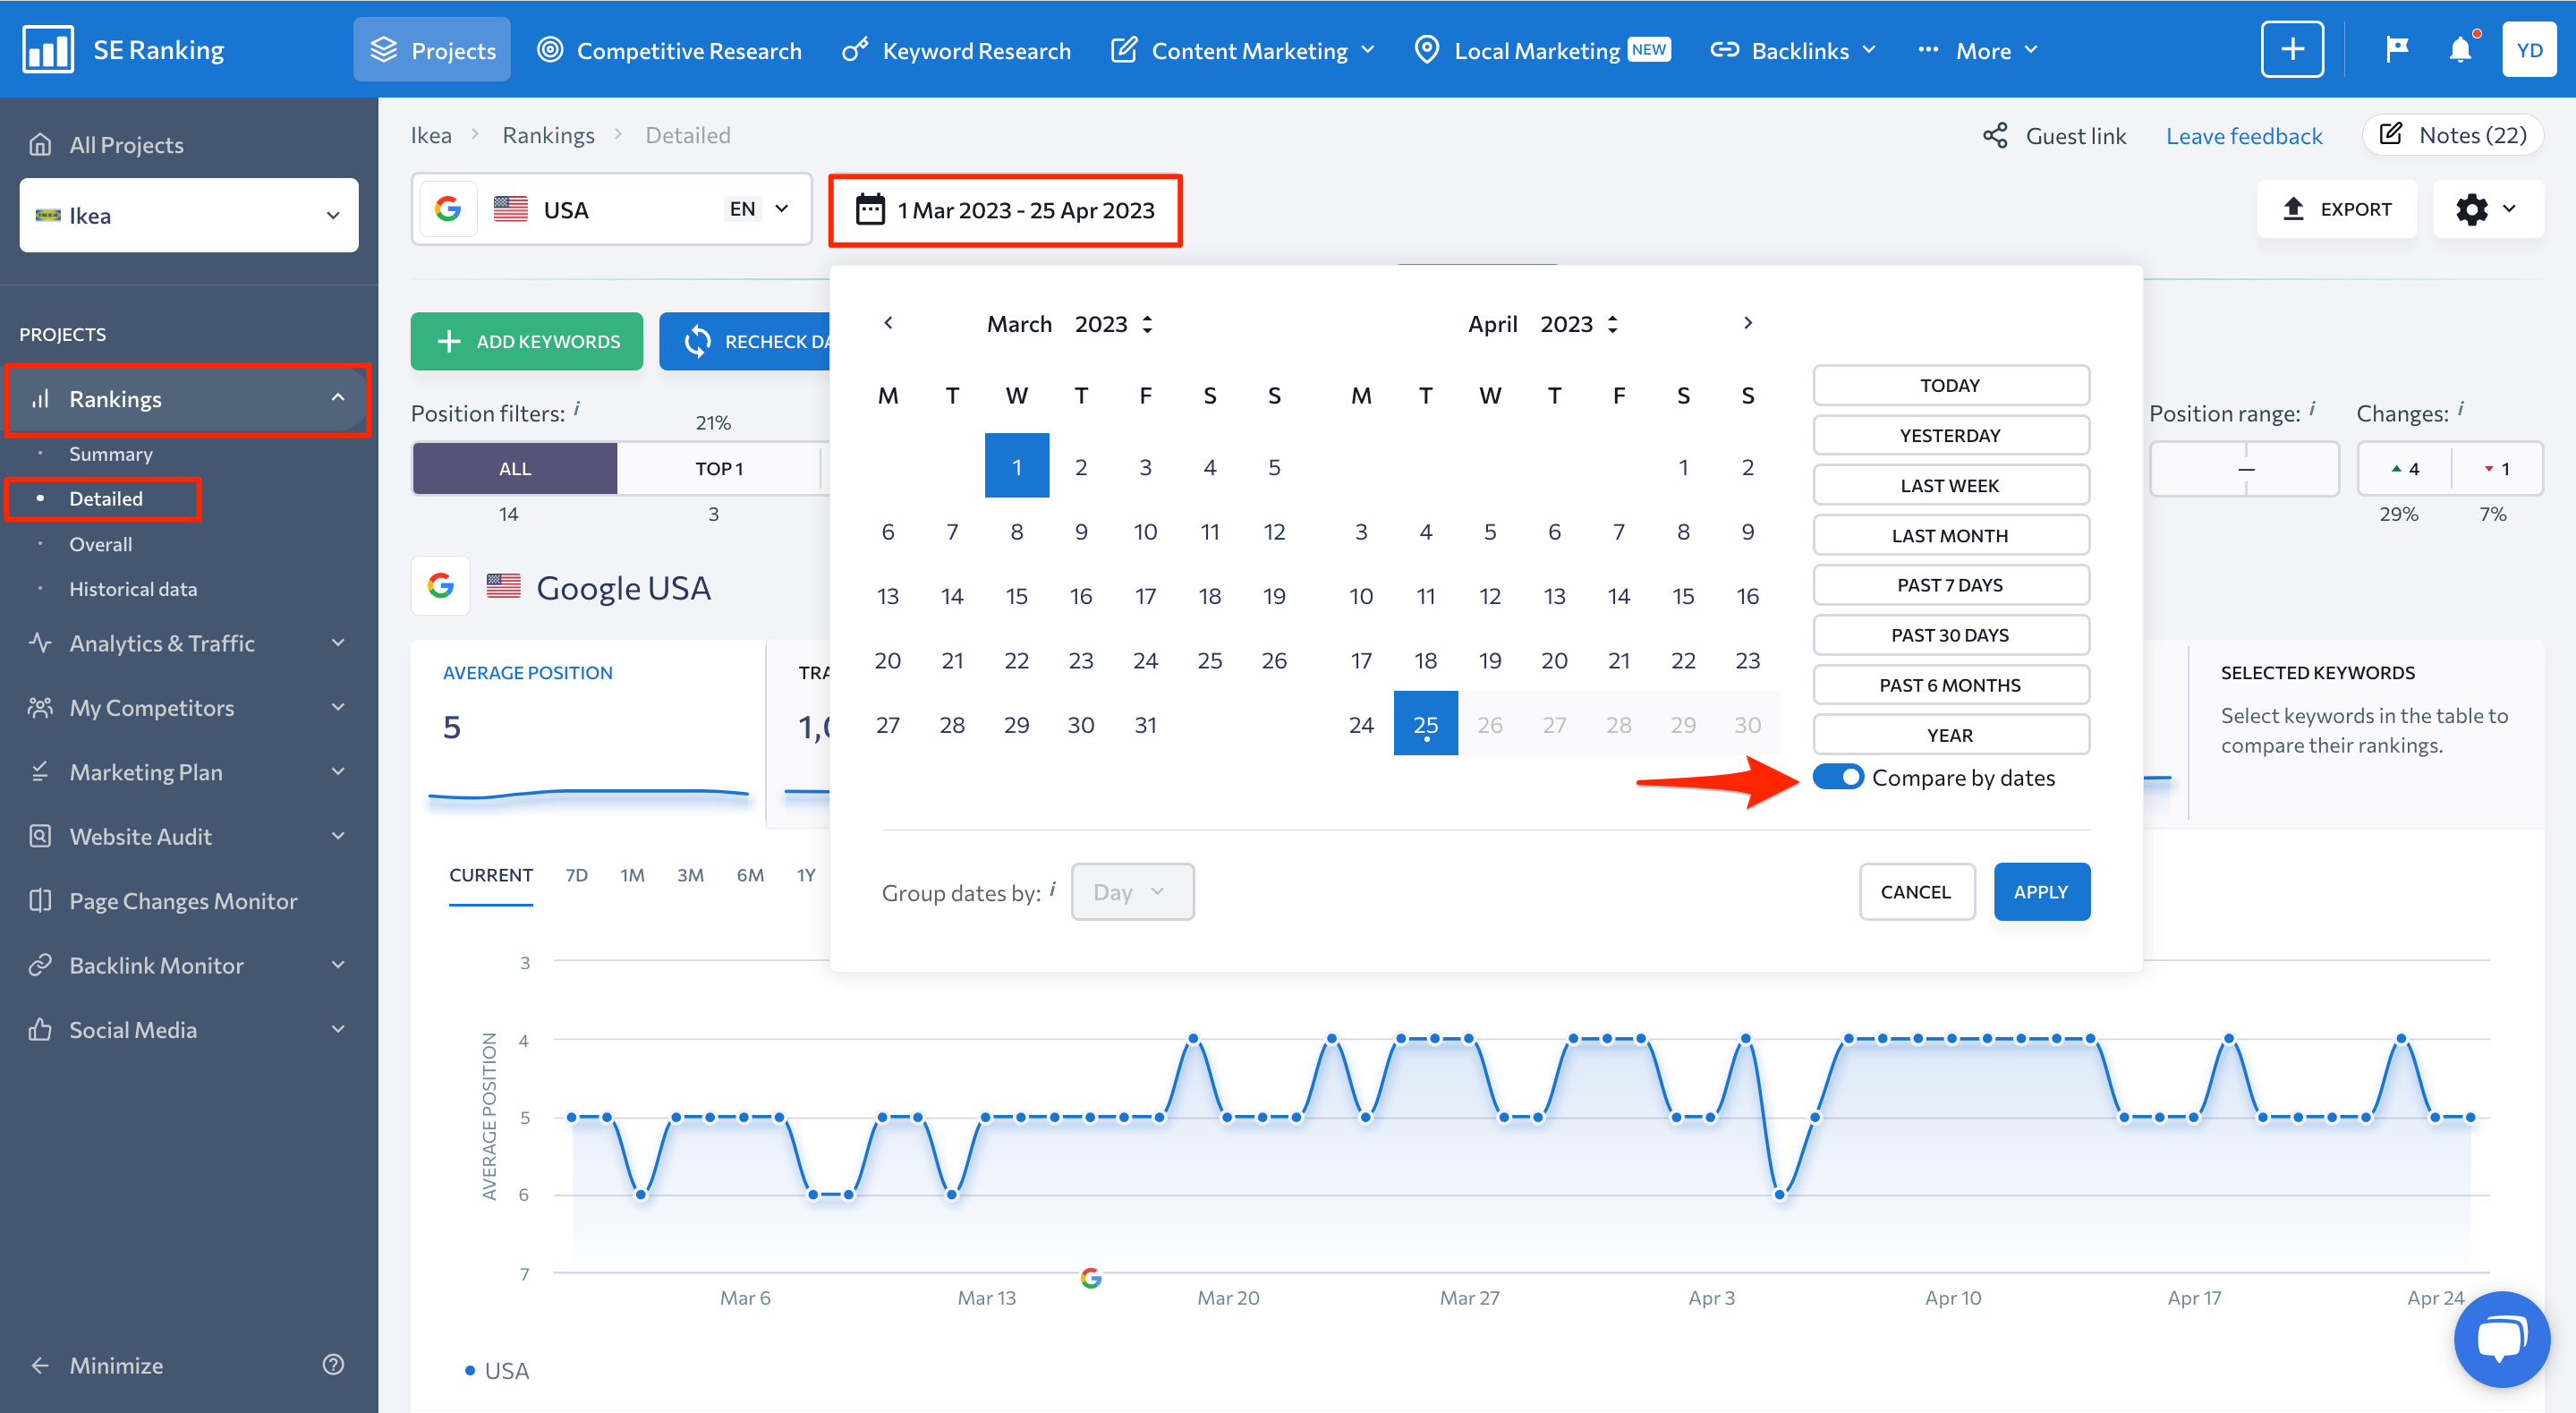 Compare by dates feature